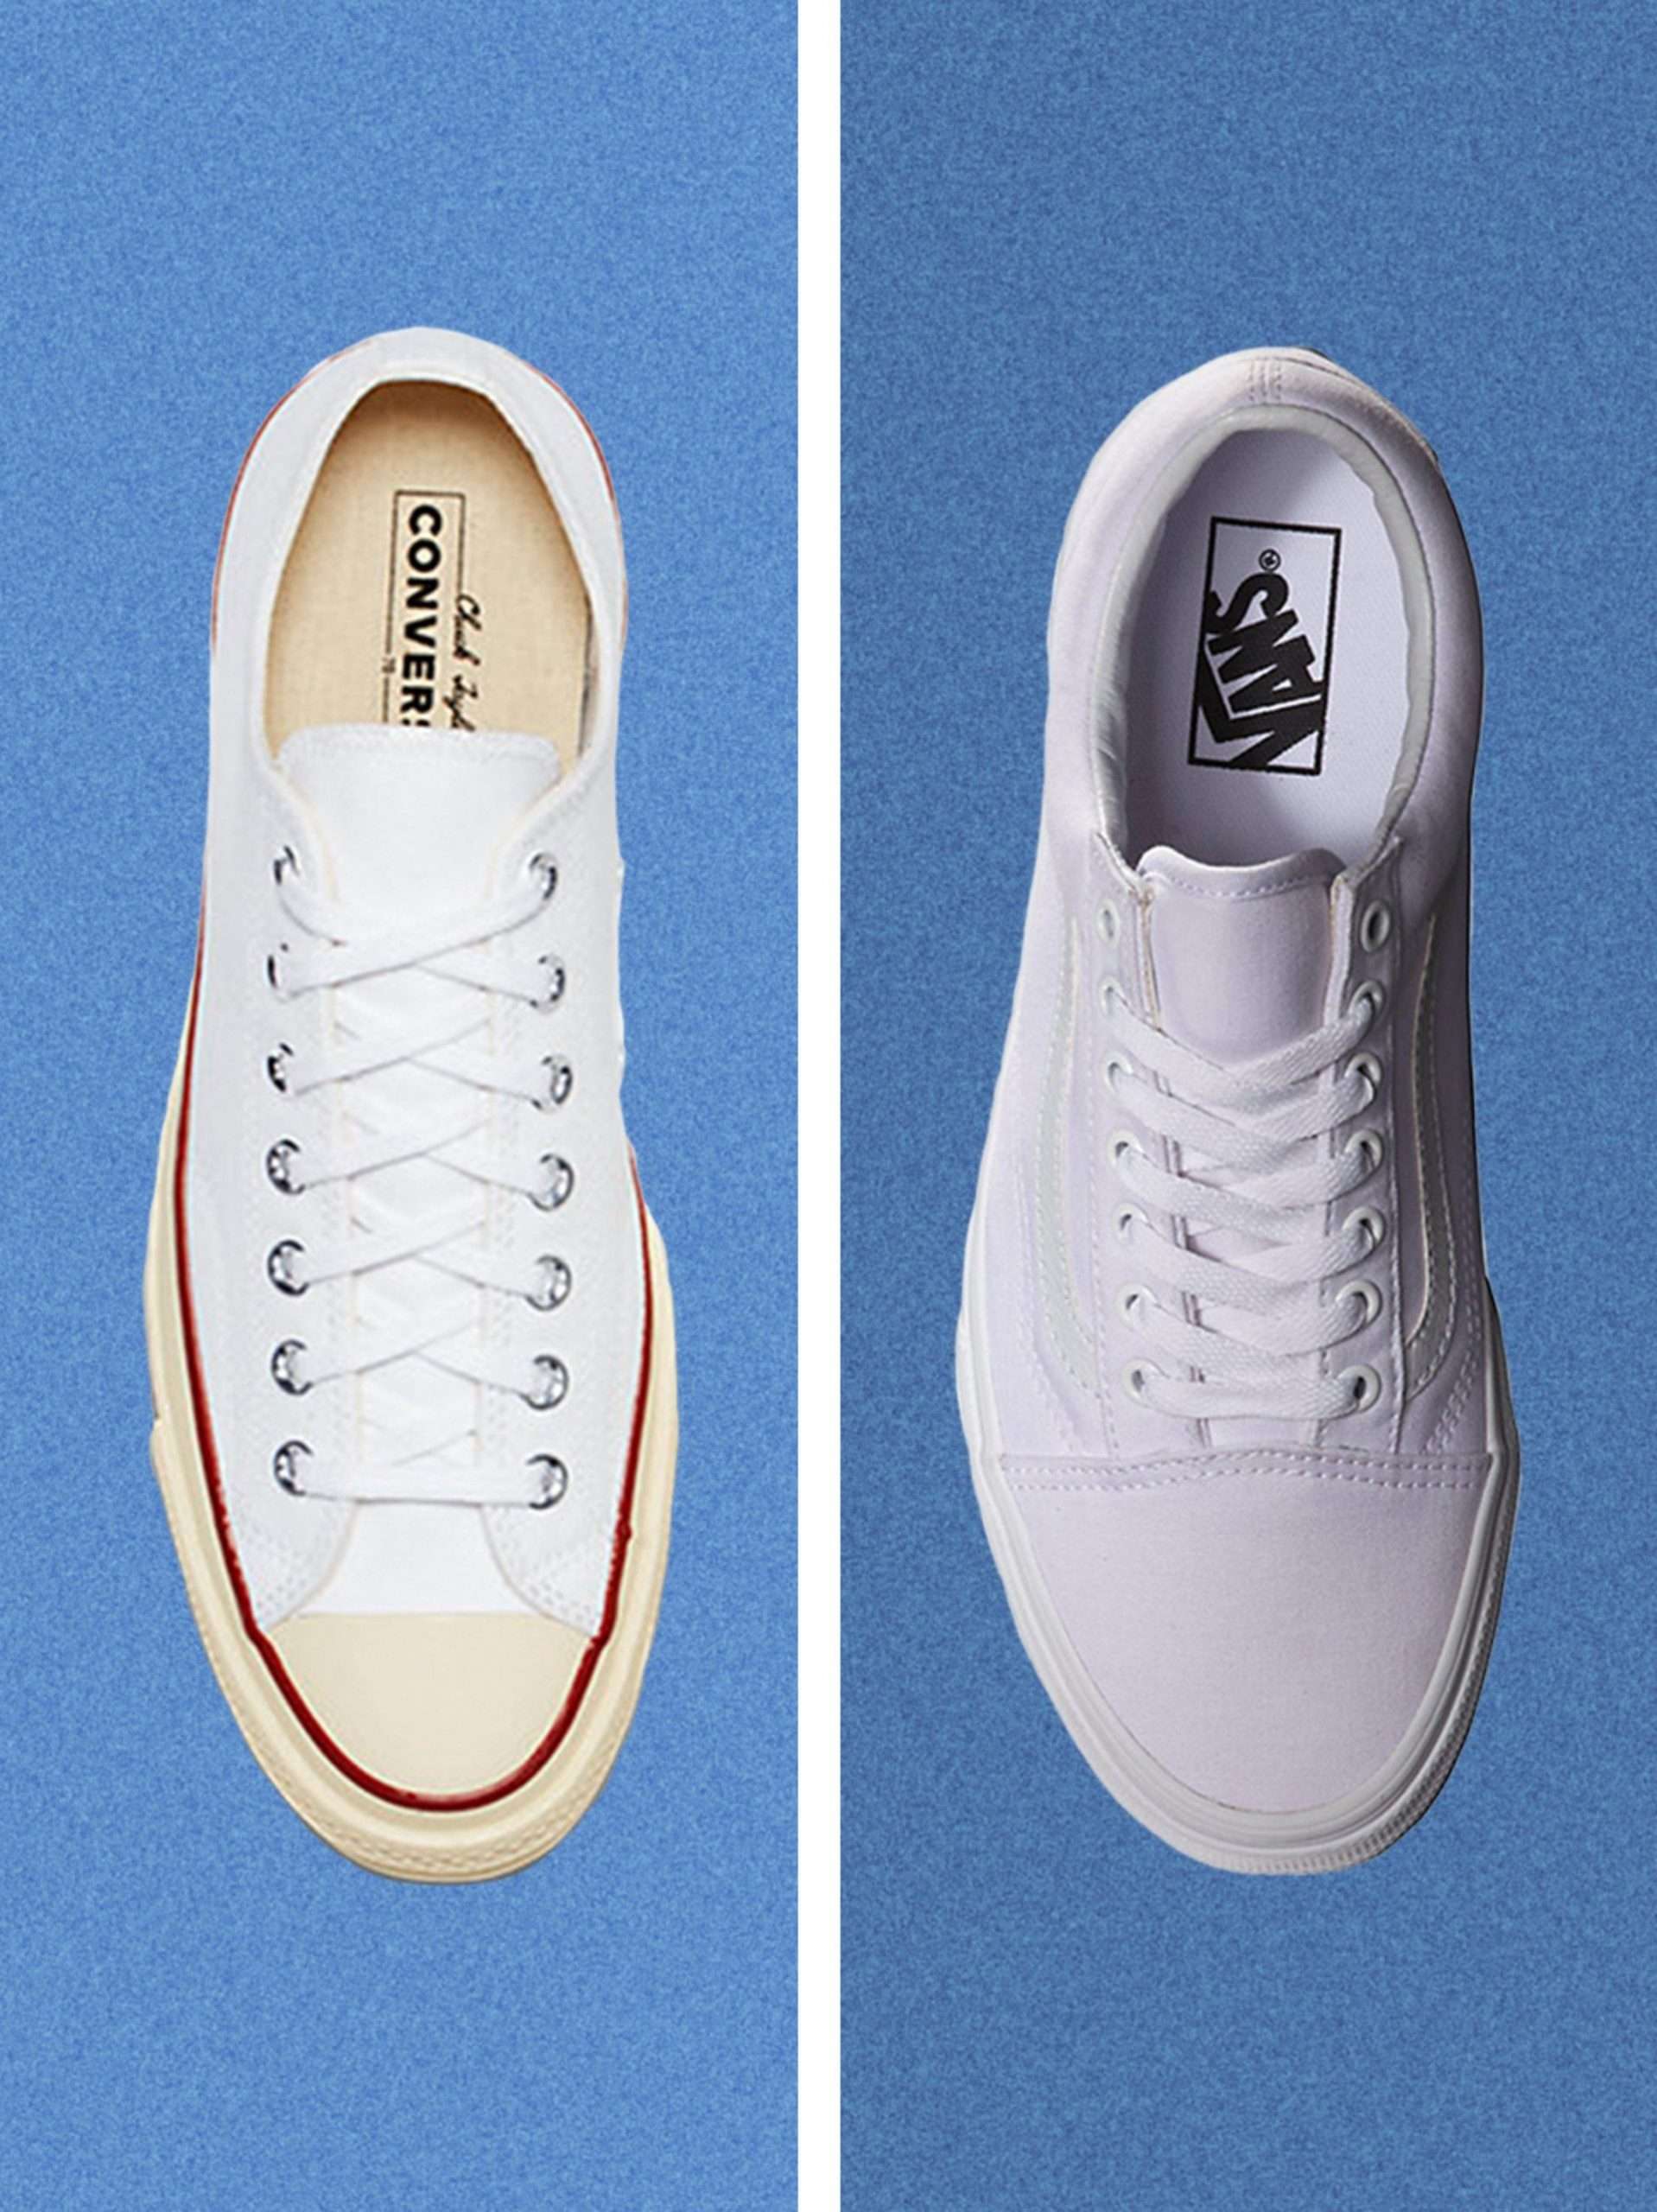 The Best White Sneakers Under $100